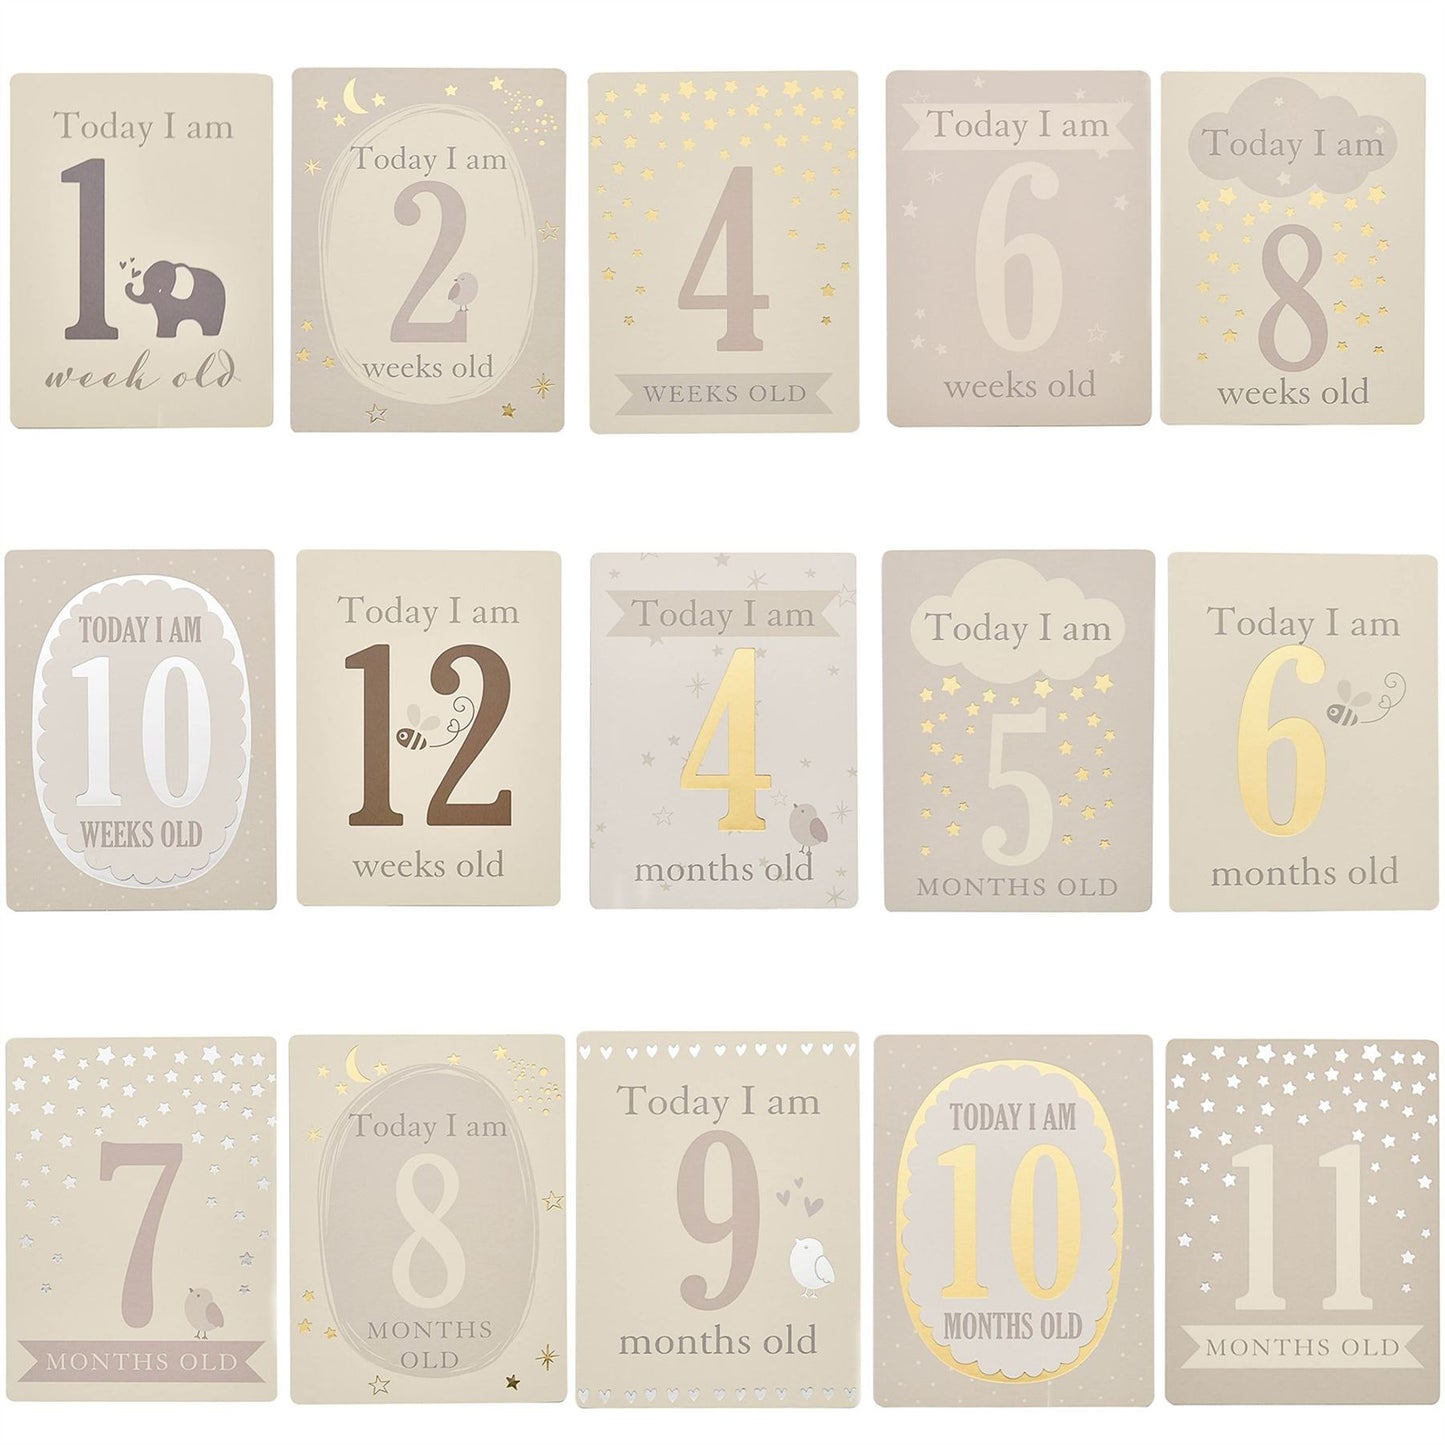 Bambino Little Star Baby Milestone Cards with foil